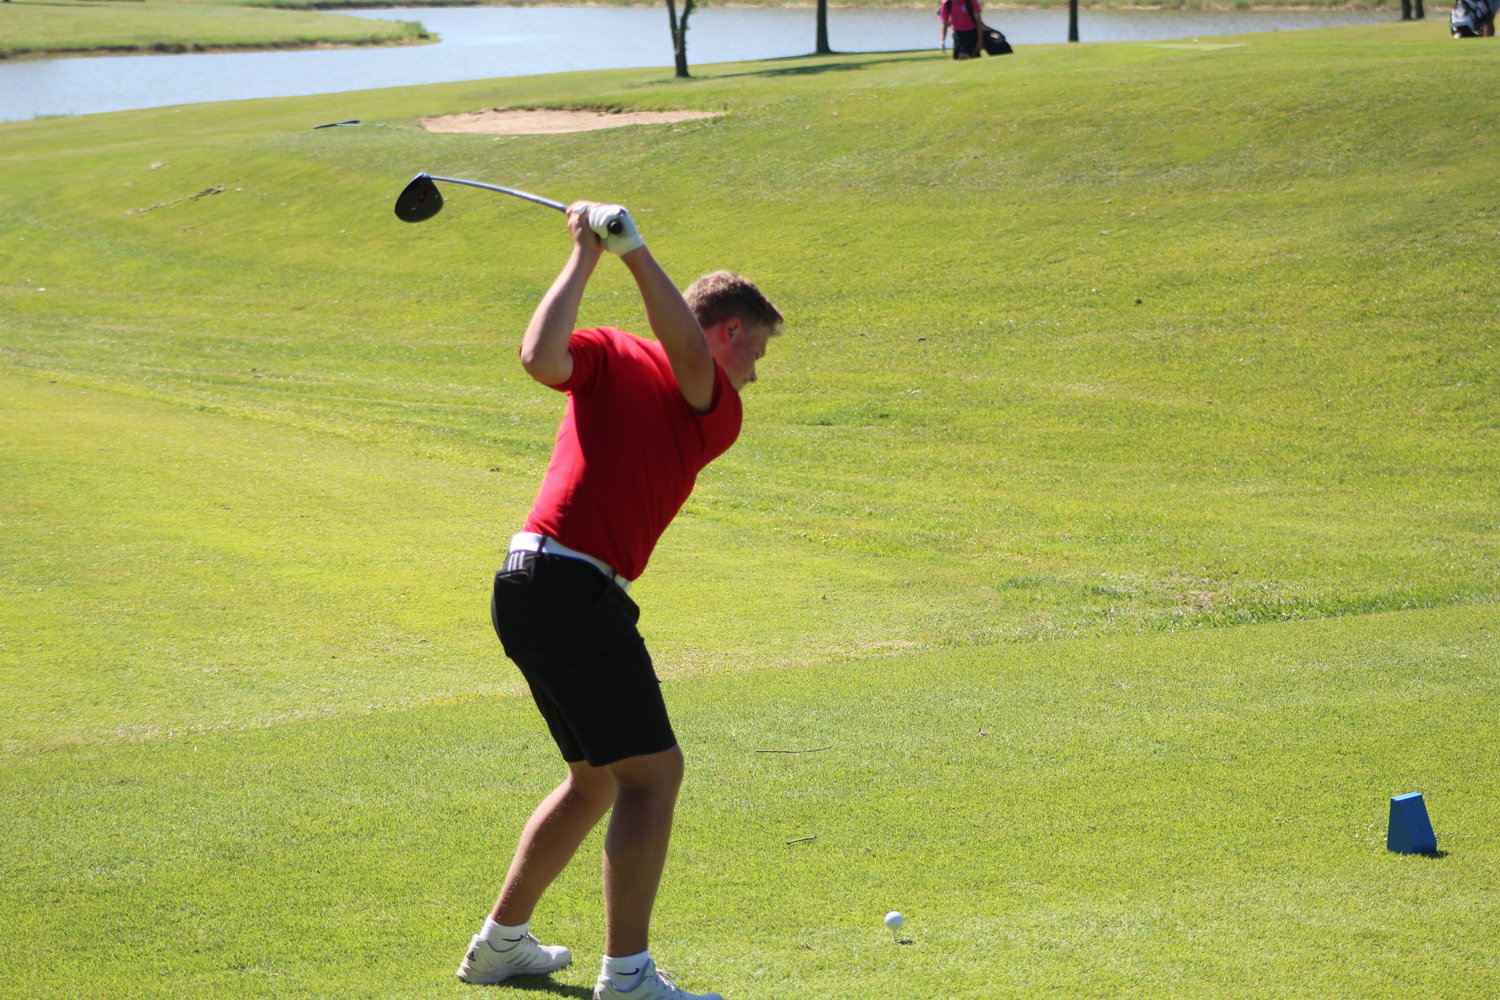 Harrison Haddock led the Mounties with an 84.